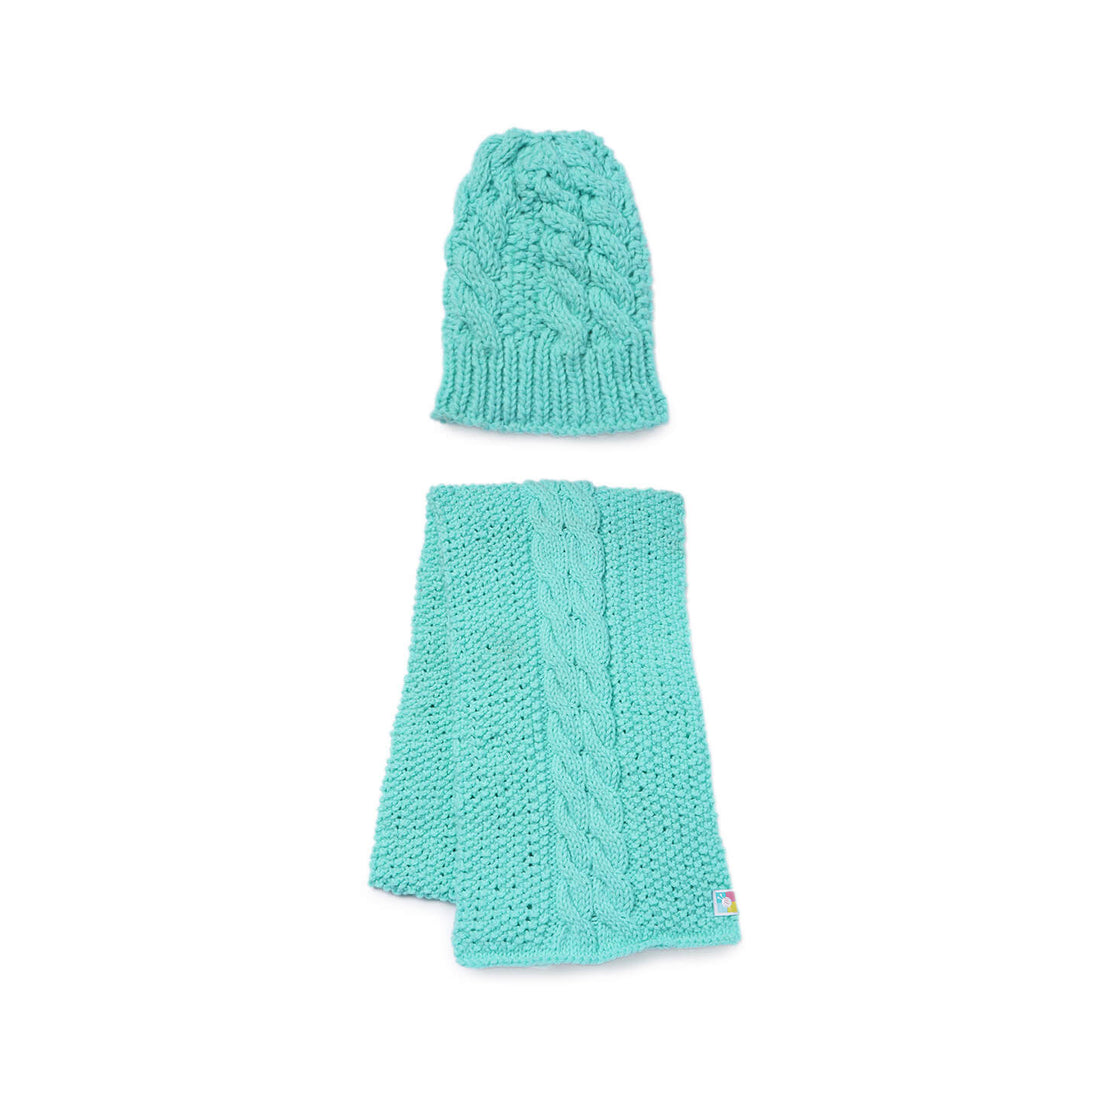 Beanie and Scarf Coordinating Set - 3200